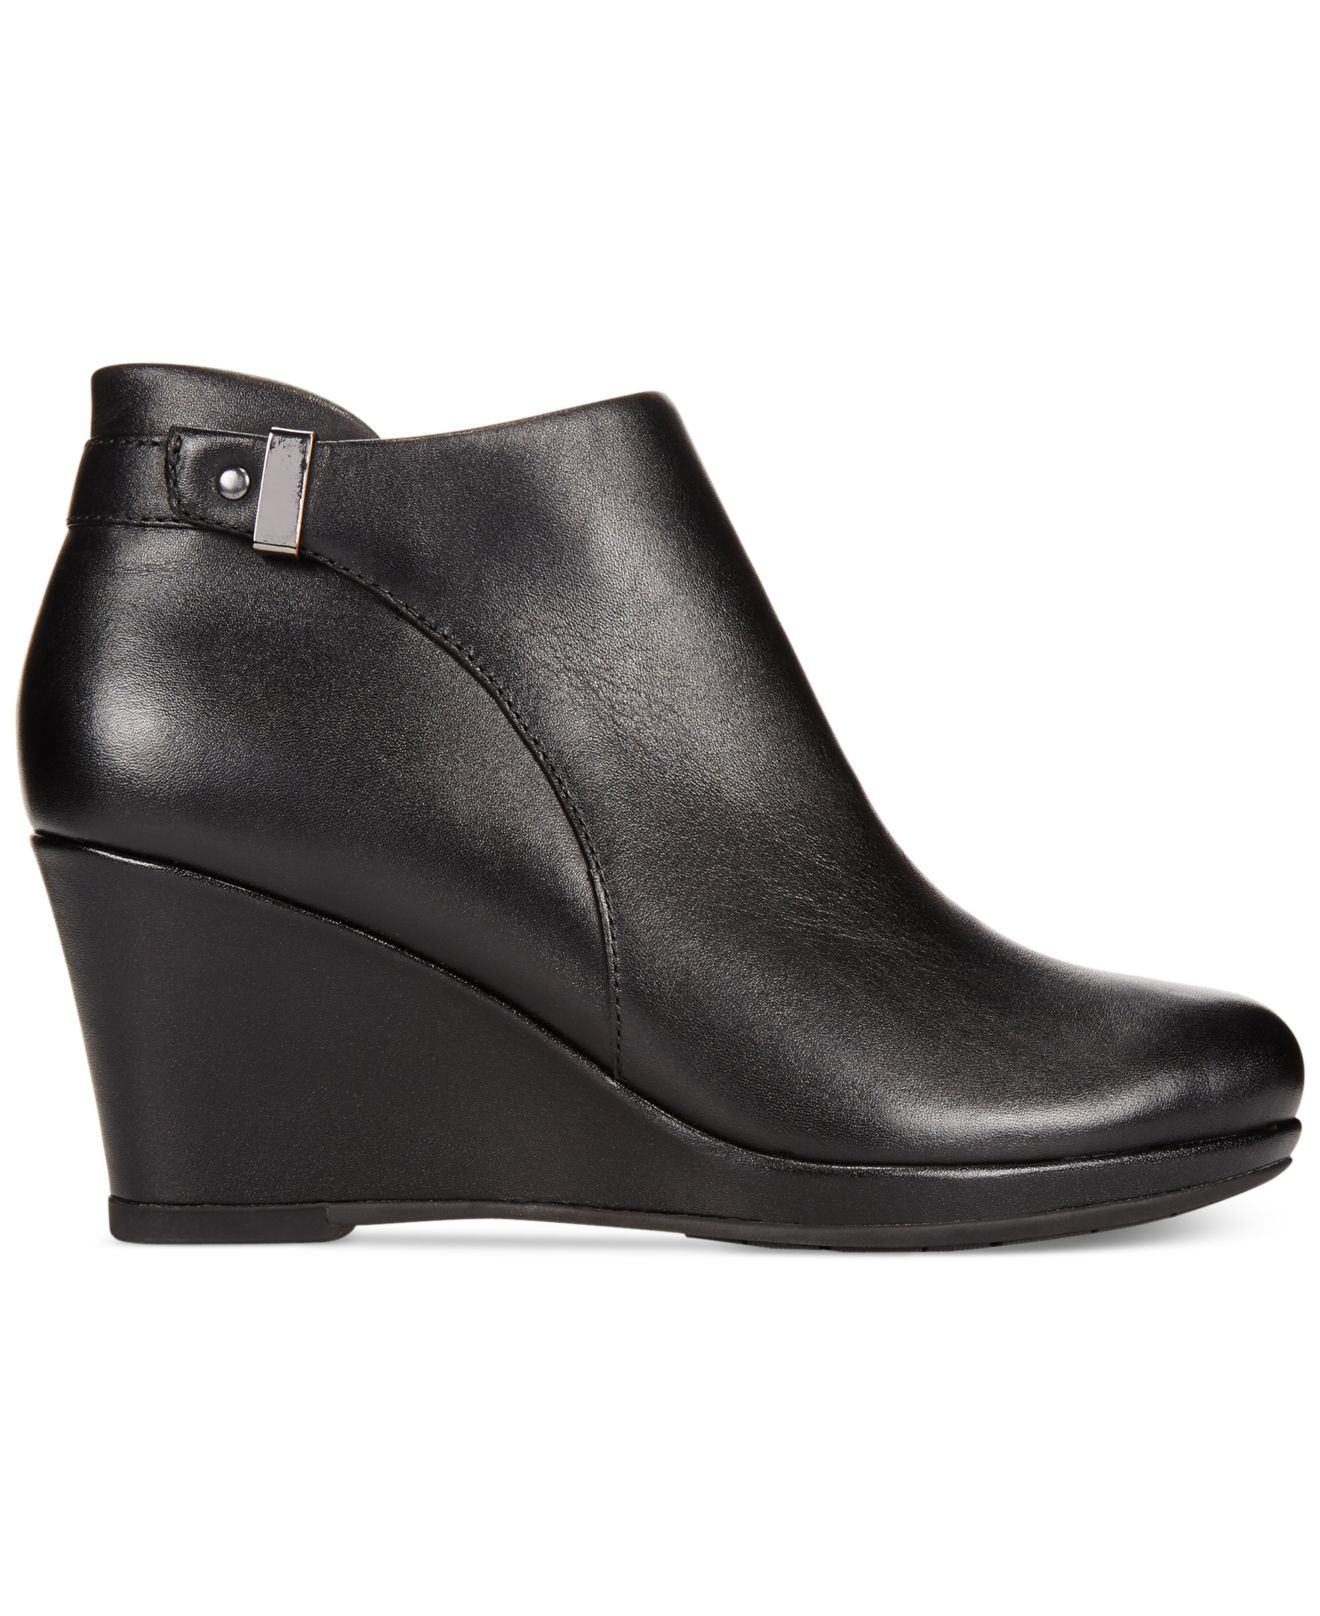 Clarks Collection Women's Camryn Fiona Wedge Booties in Black | Lyst